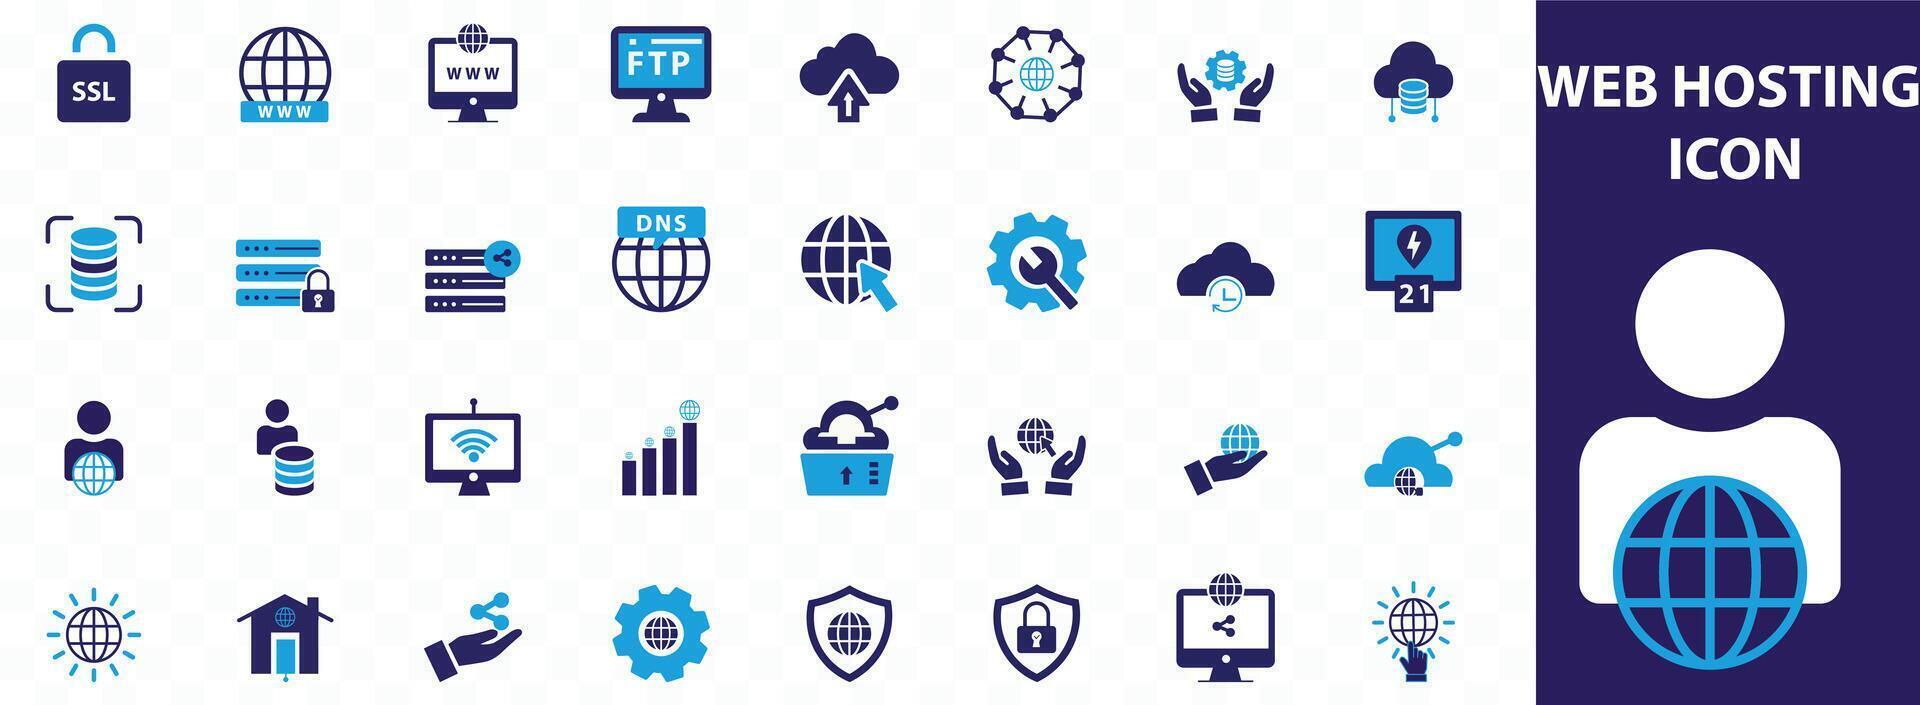 Web hosting icon set. Containing cloud computing, server, domain, firewall, internet, FTP, database, SSL, data hosting and more. Solid icons collection. vector